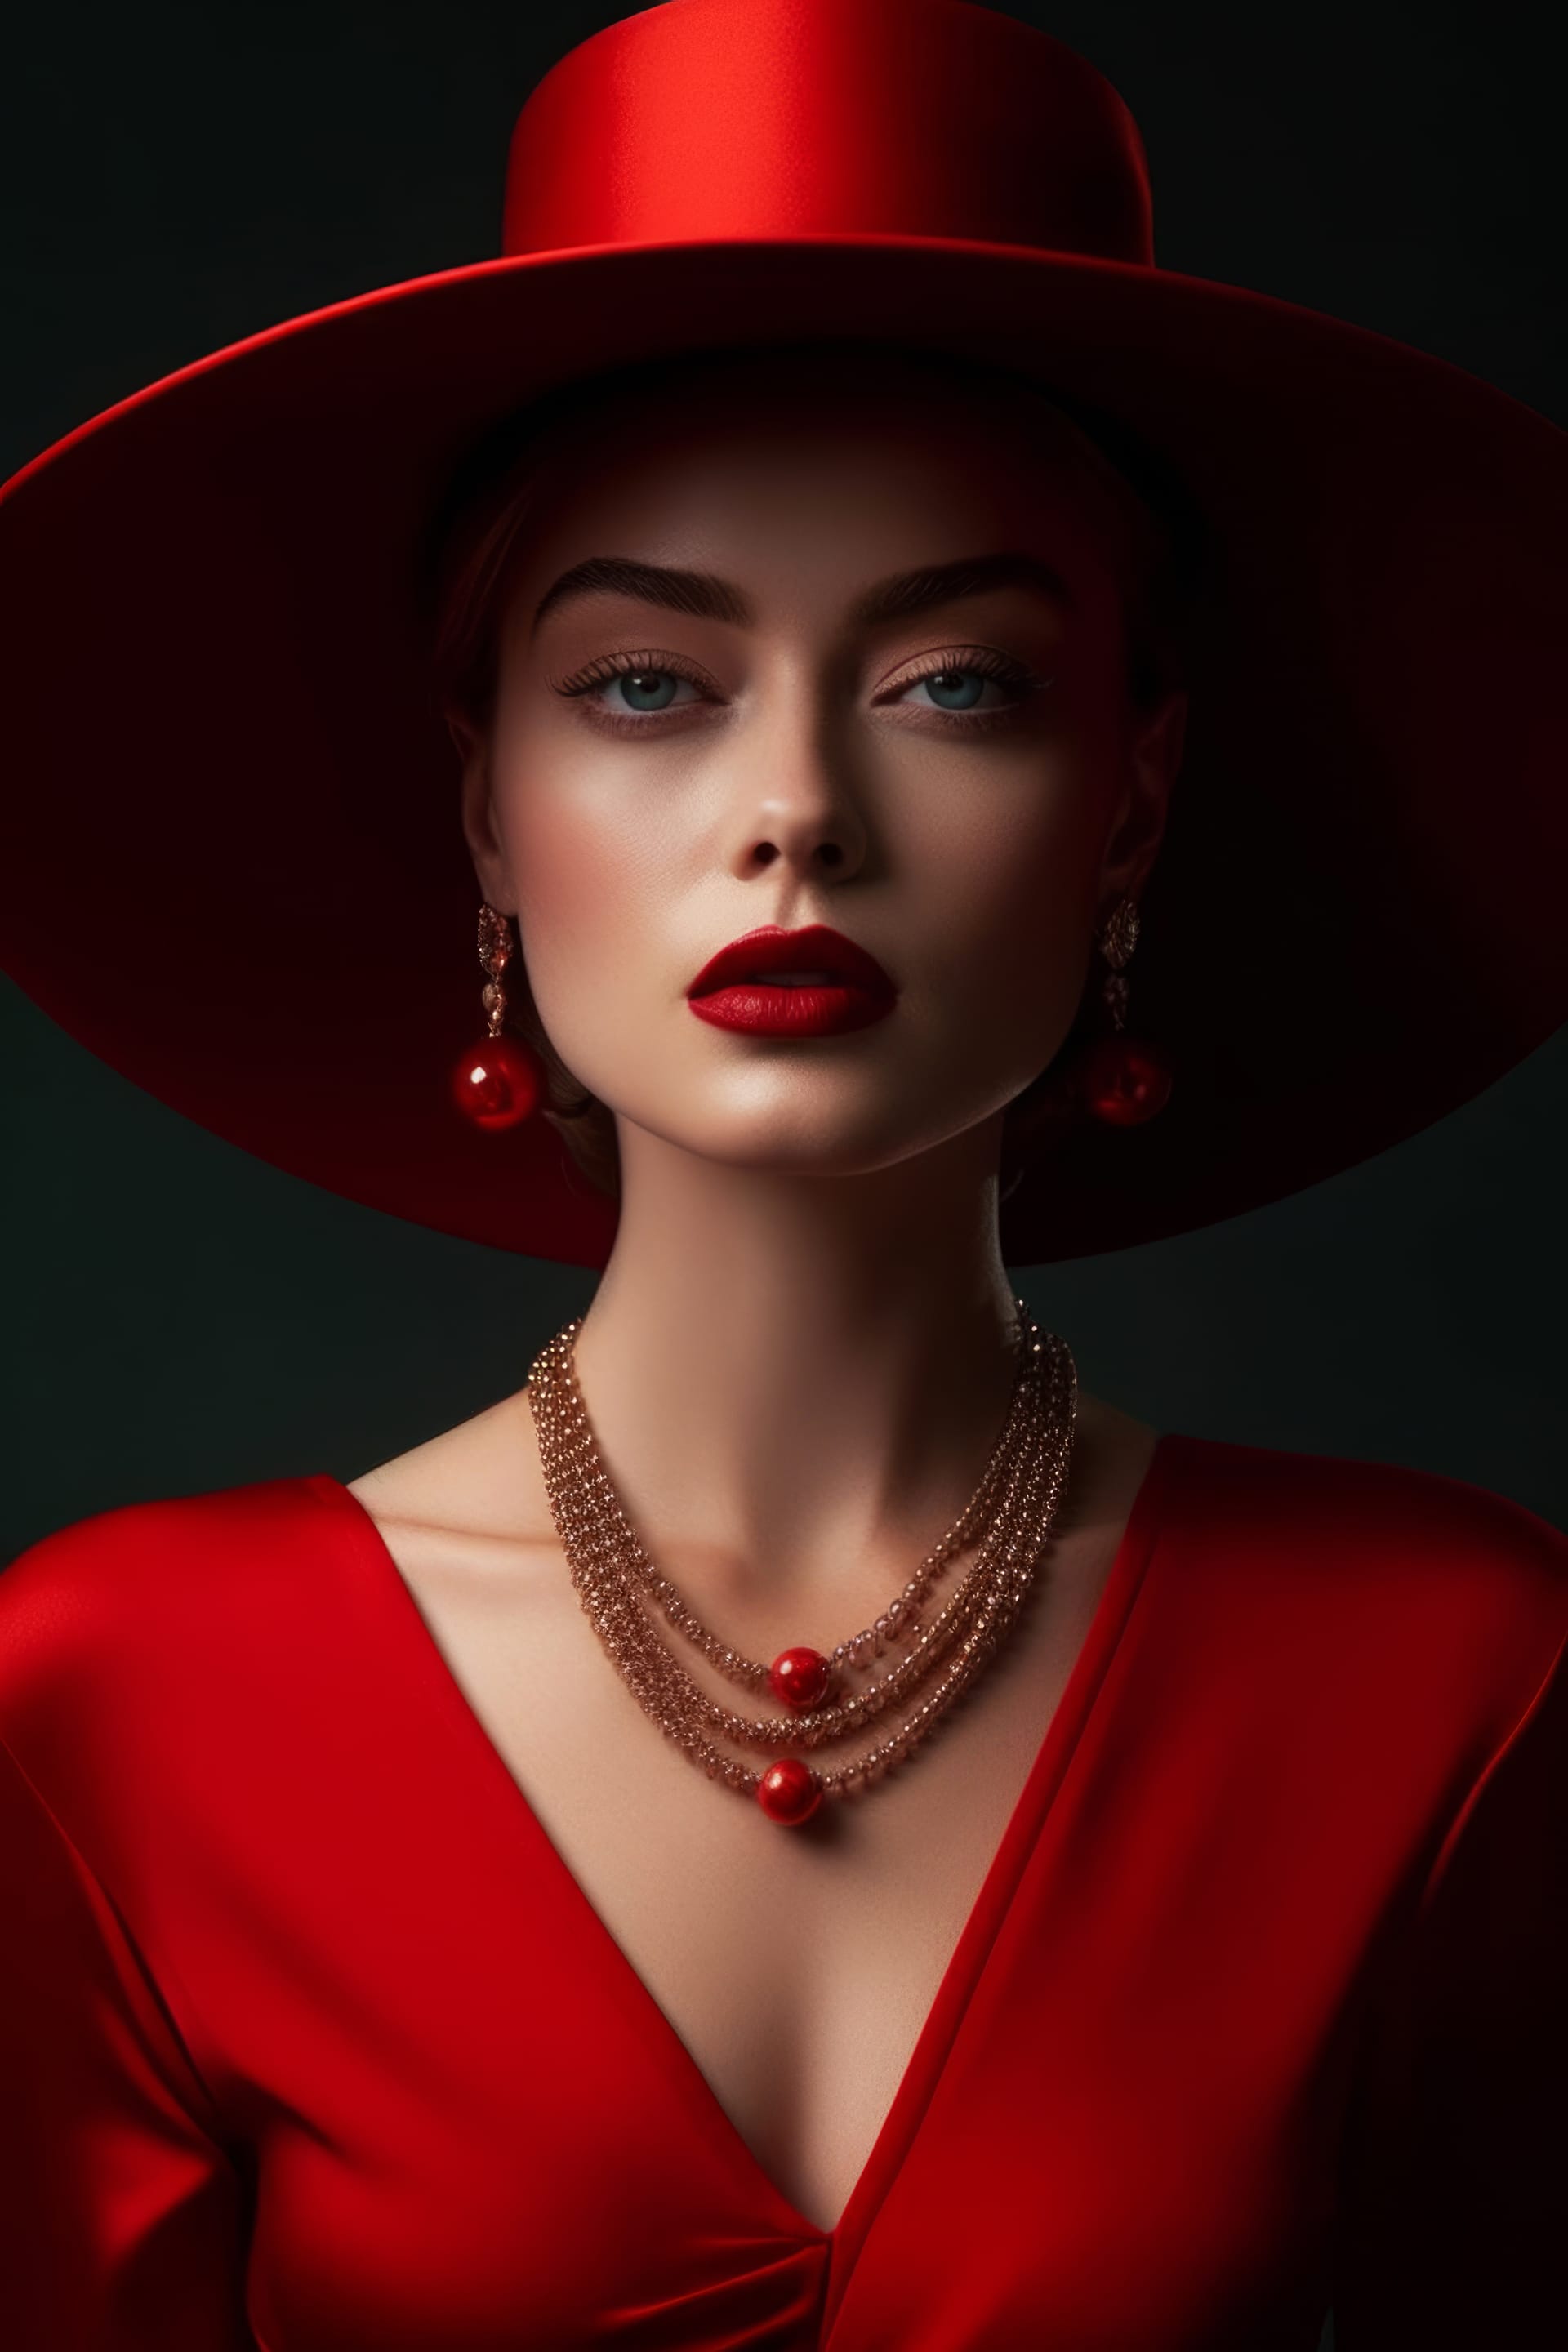 Woman red hat red lipstick excellent image